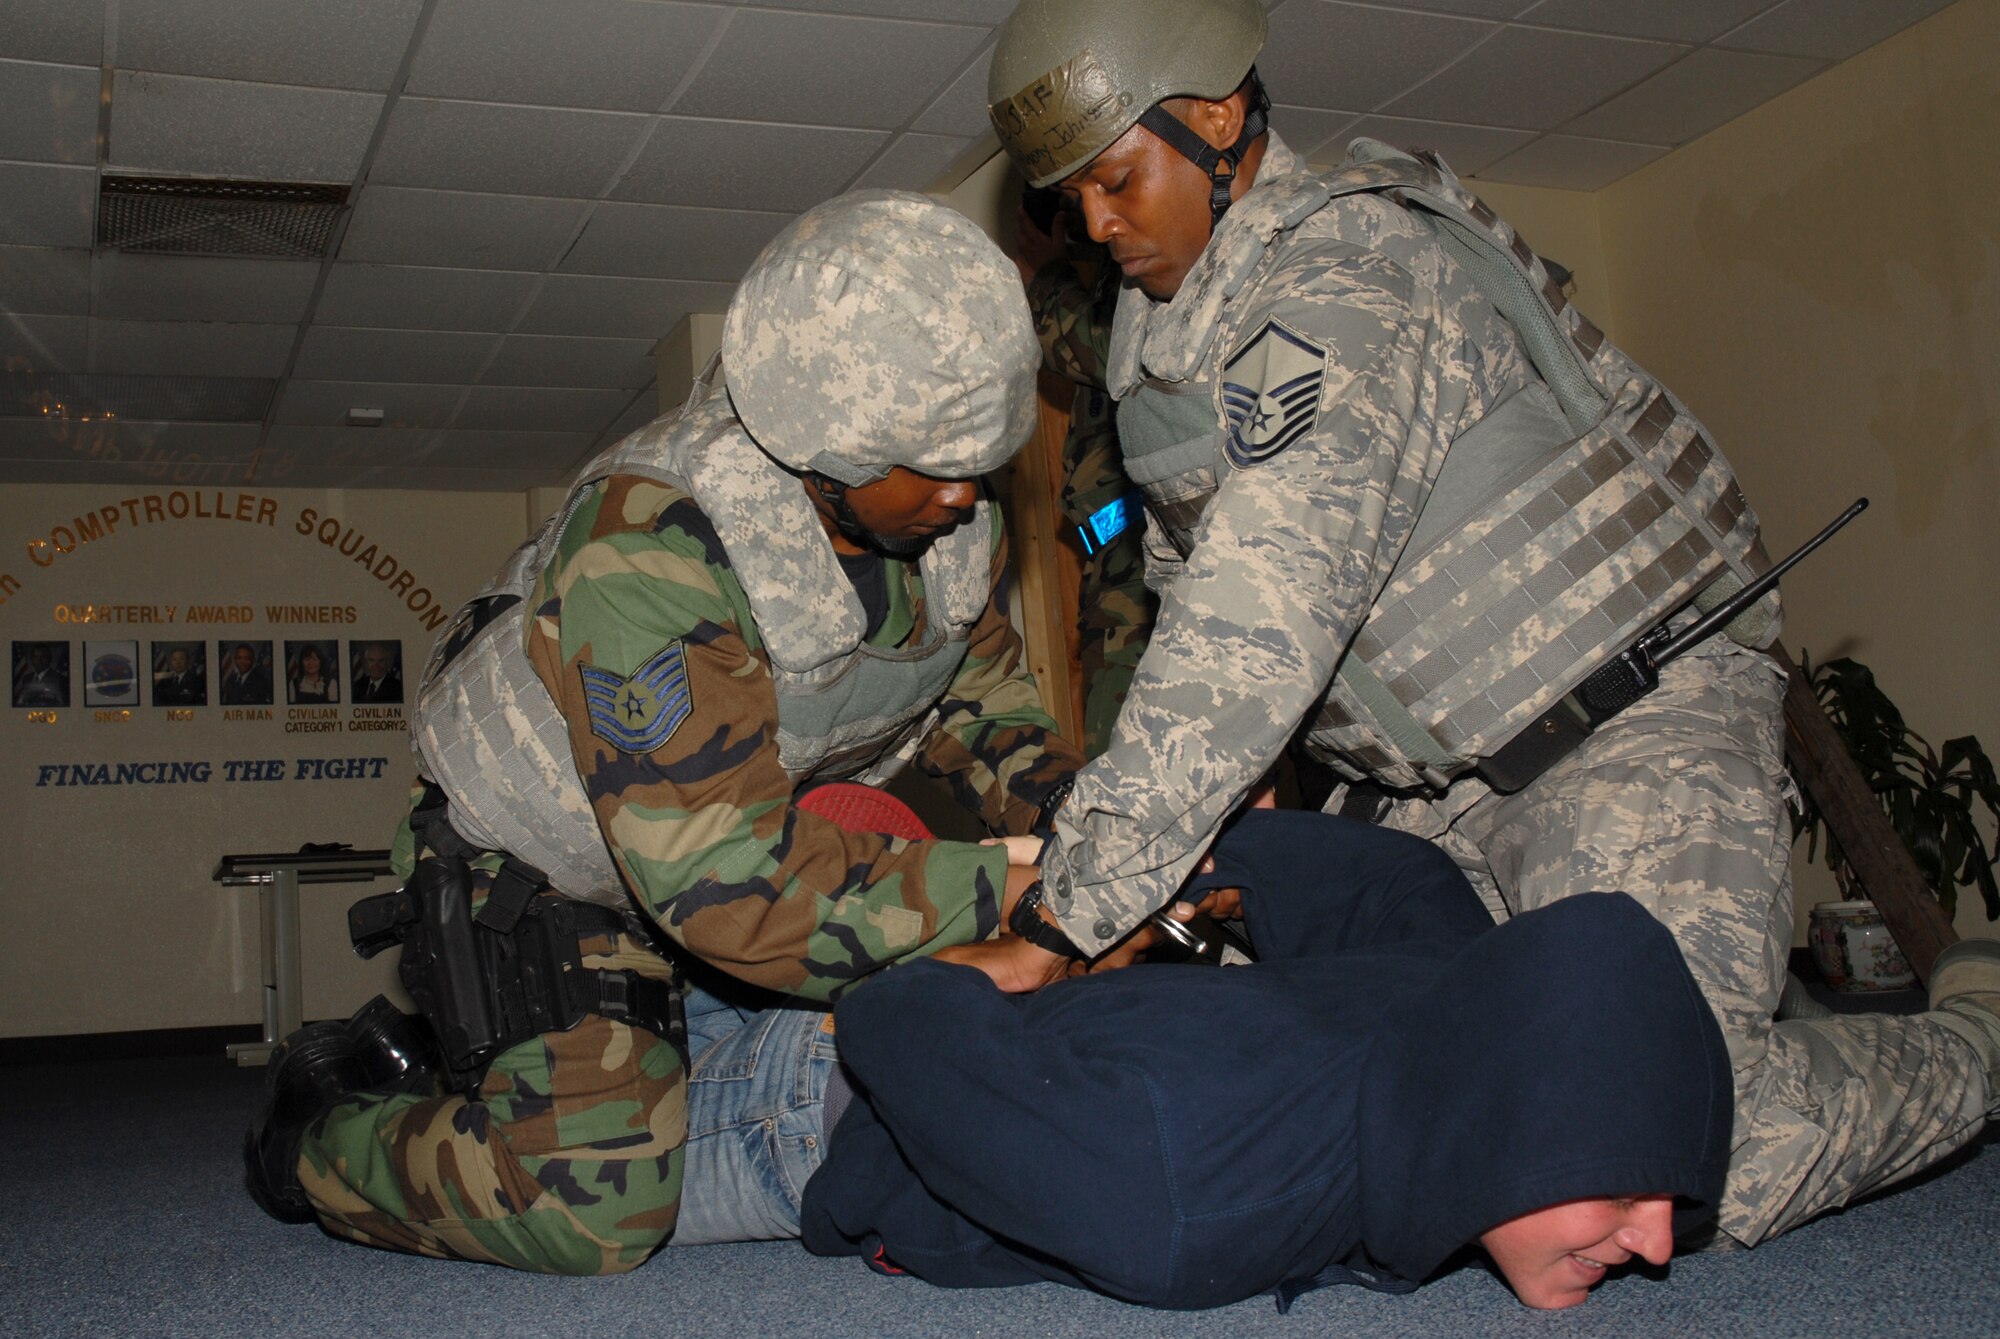 Master Sgt. Anthony Johnson and Tech. Sgt. Costello Williams, both assigned to the 18th Security Forces Squadron, take down and handcuff a perpetrator during a hostile situation scenario at the 18th Comptroller Squadron building, during the 2008 Pacific Air Forces Operational Readiness Inspection at Kadena Air Base, Japan, March 11, 2008. PACAF is conducting the inspection from March 9 to 15 to validate the mission readiness of the 18th Wing. (U.S. Air Force photo/Staff Sgt. Chrissy FitzGerald)